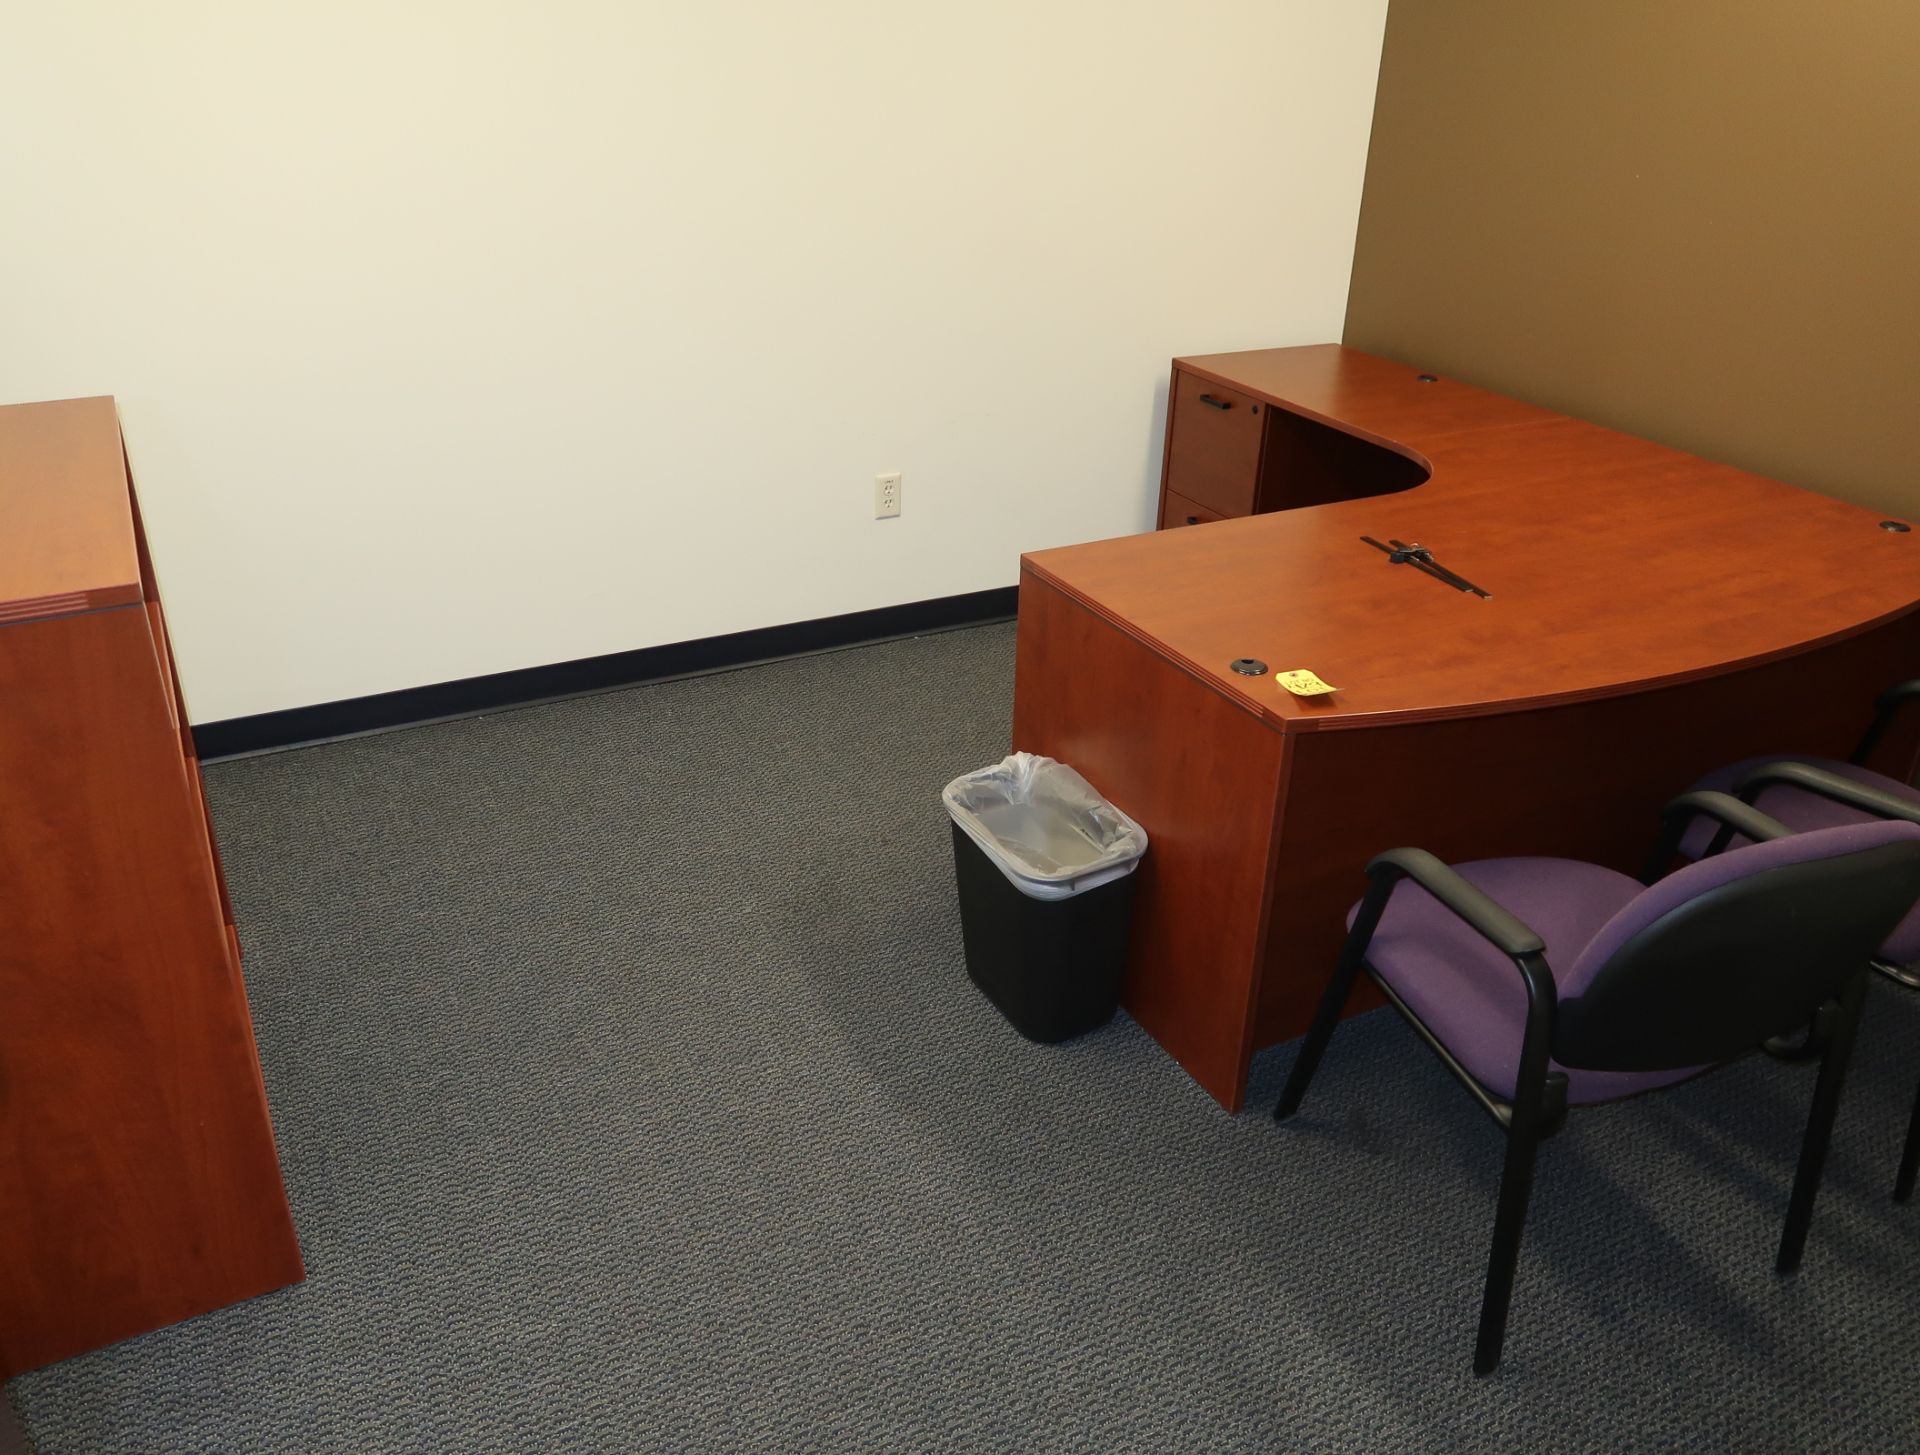 LOT OFFICE FURNITURE, L-SHAPED DESK, BOOK CASE, 2-STACK CHAIRS